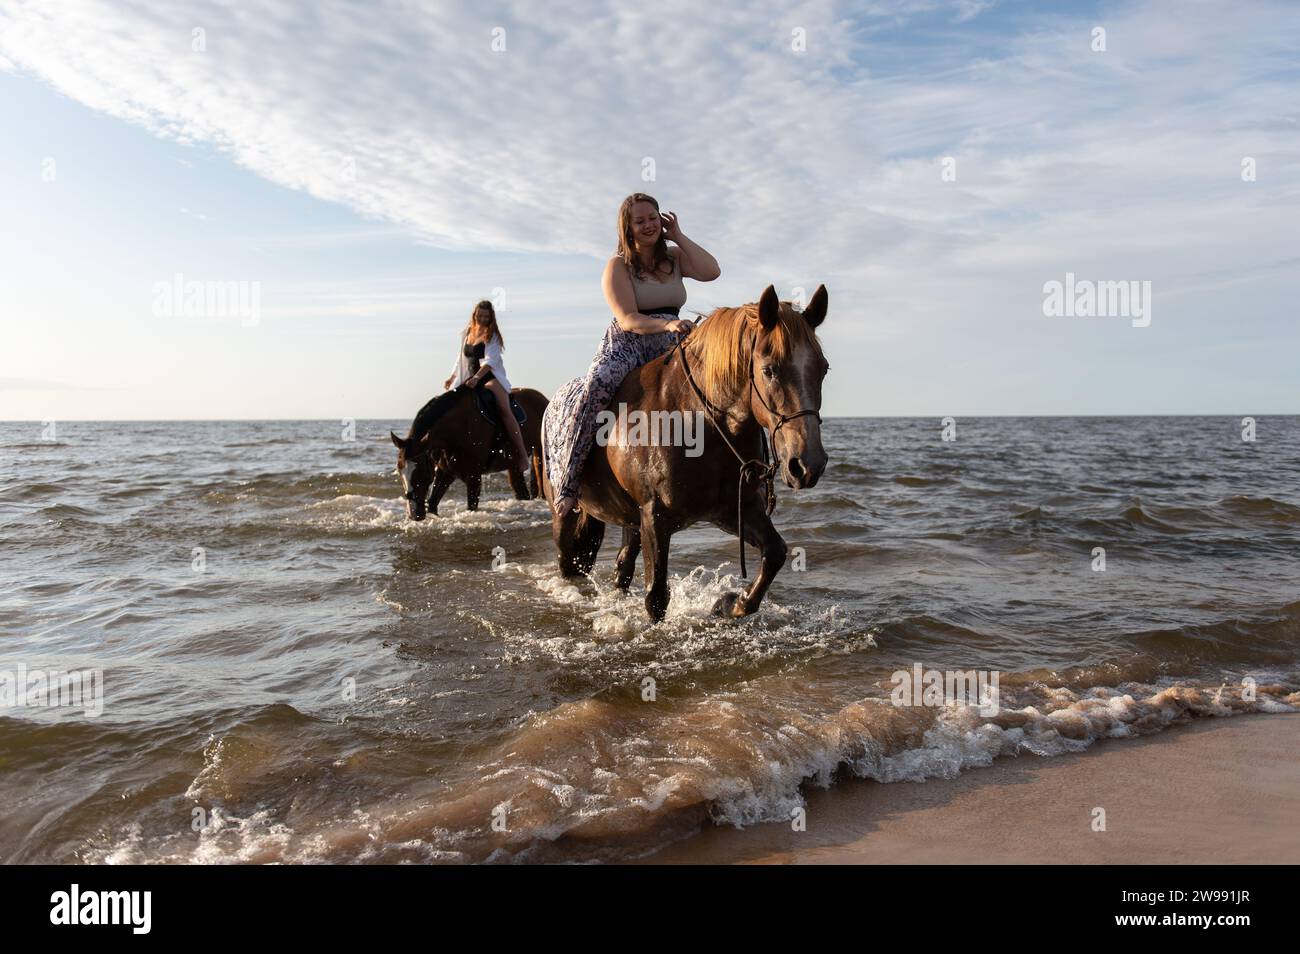 Two female riders galloping on horseback through the shallow waters of a coastal beach Stock Photo